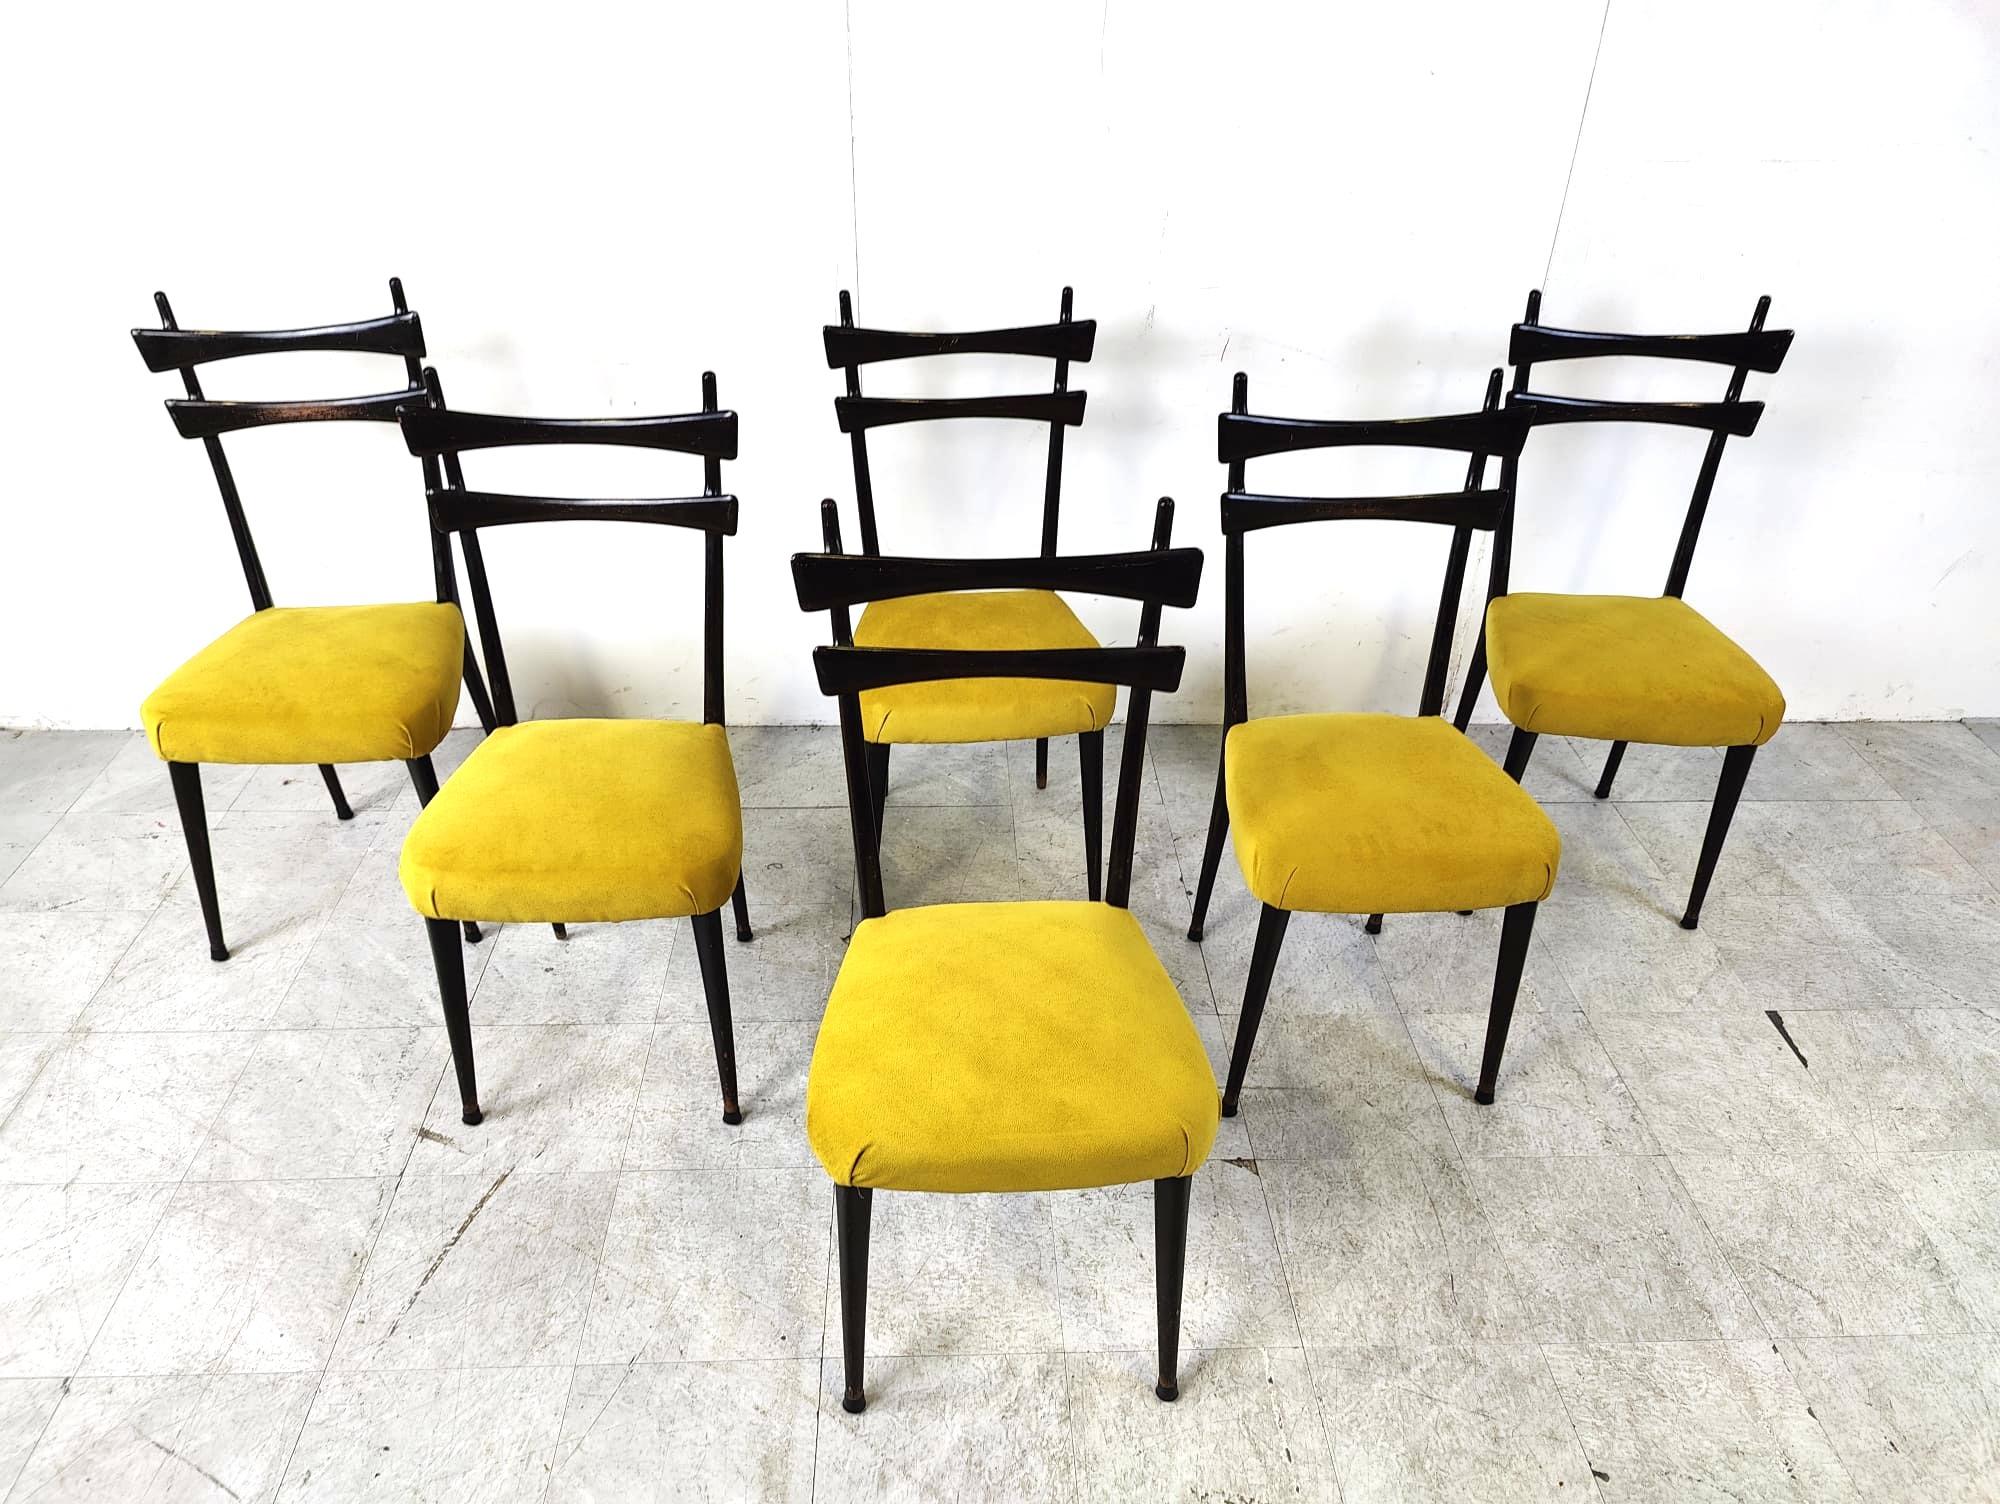 Mid century italian dining chairs made from an incredibly elegant ebonized wooden frame and reupholstered in oker/yellow fabric.

Beautiful italian design from the 1950s very much in the style of Gio Ponti.

They are very light but very sturdy and